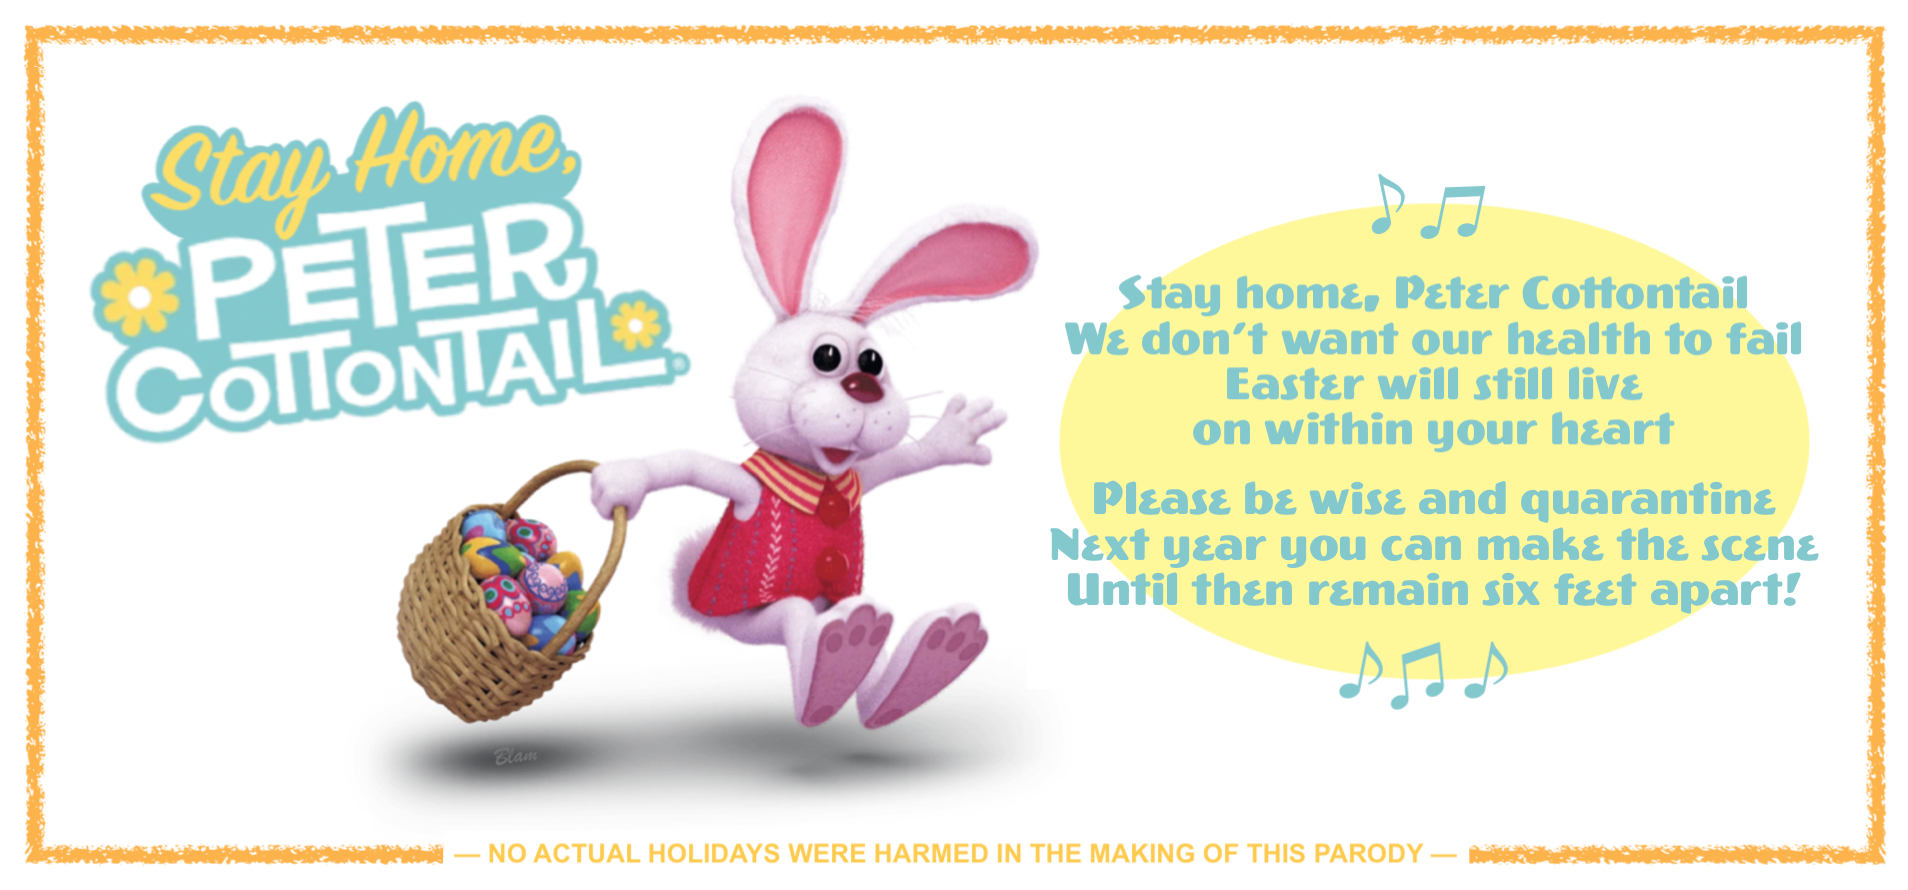 Stay home, Peter Cottontail / We don't want our health to fail / Easter will still live on within your heart / Please be wise and quarantine / Next year you can make the scene / Until then please stay six feet apart!